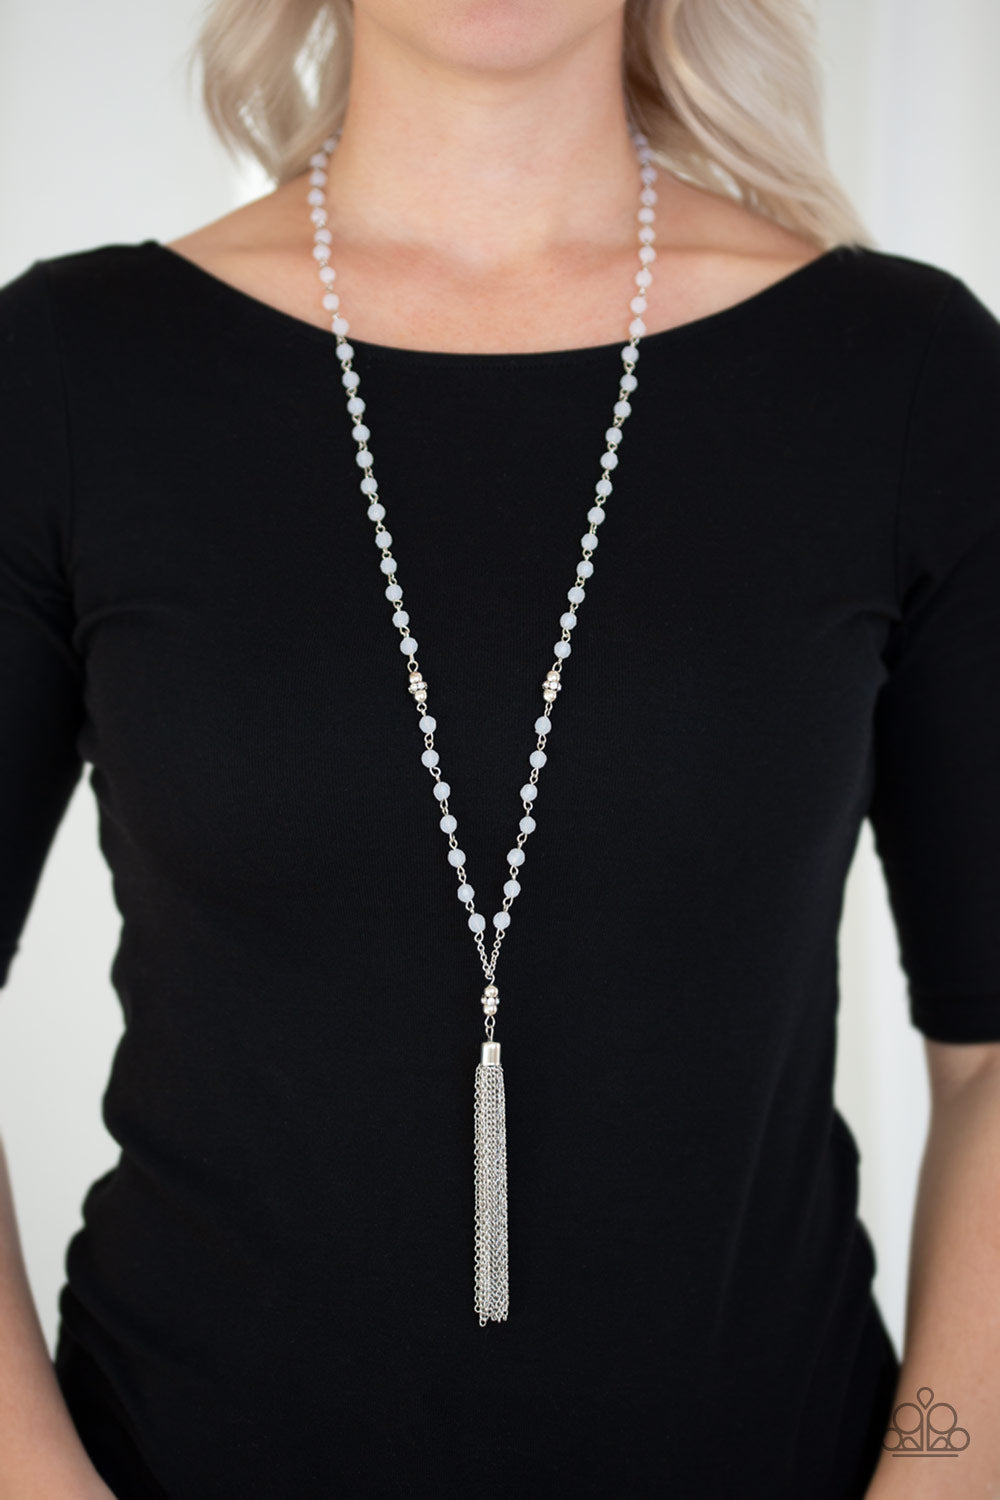 Paparazzi Tassel Takeover White Long Necklace